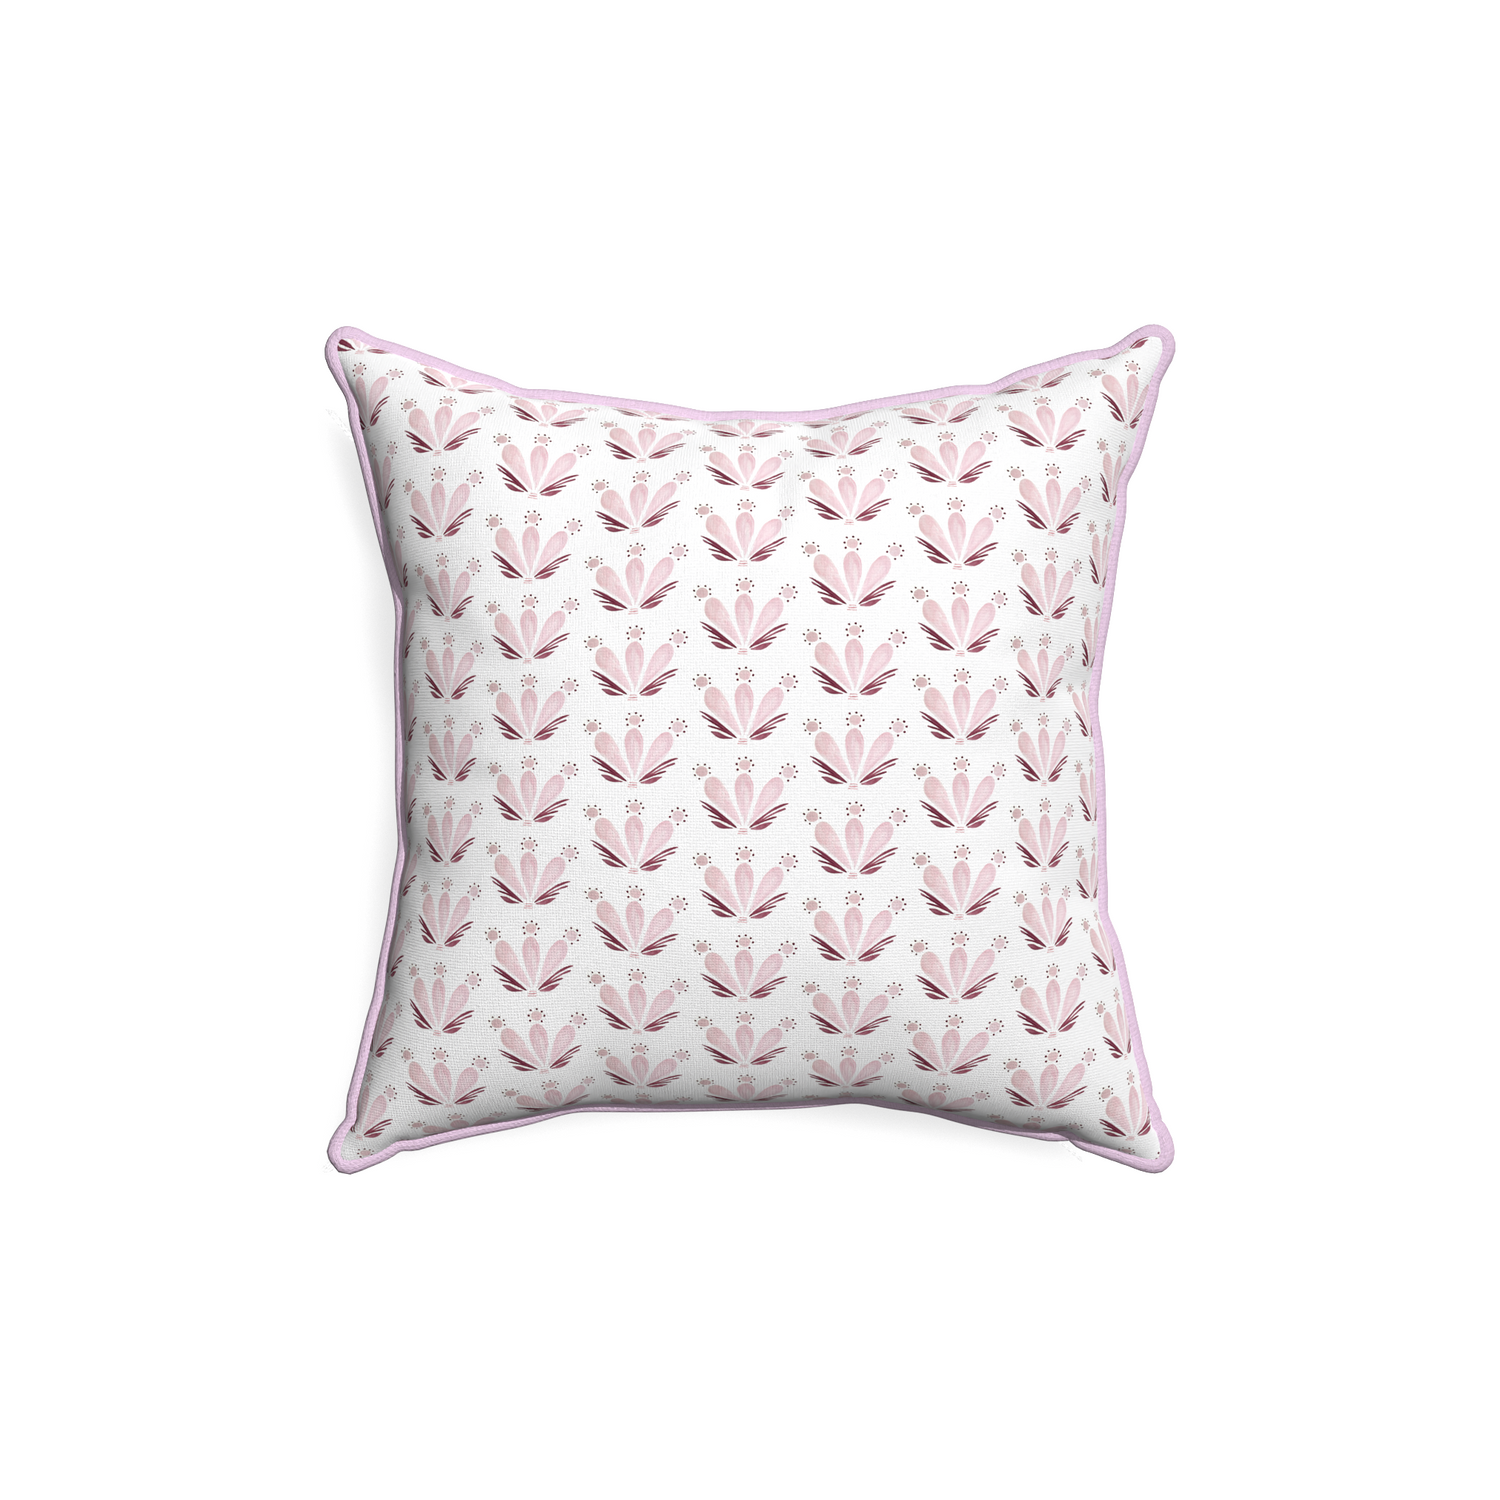 18-square serena pink custom pillow with l piping on white background